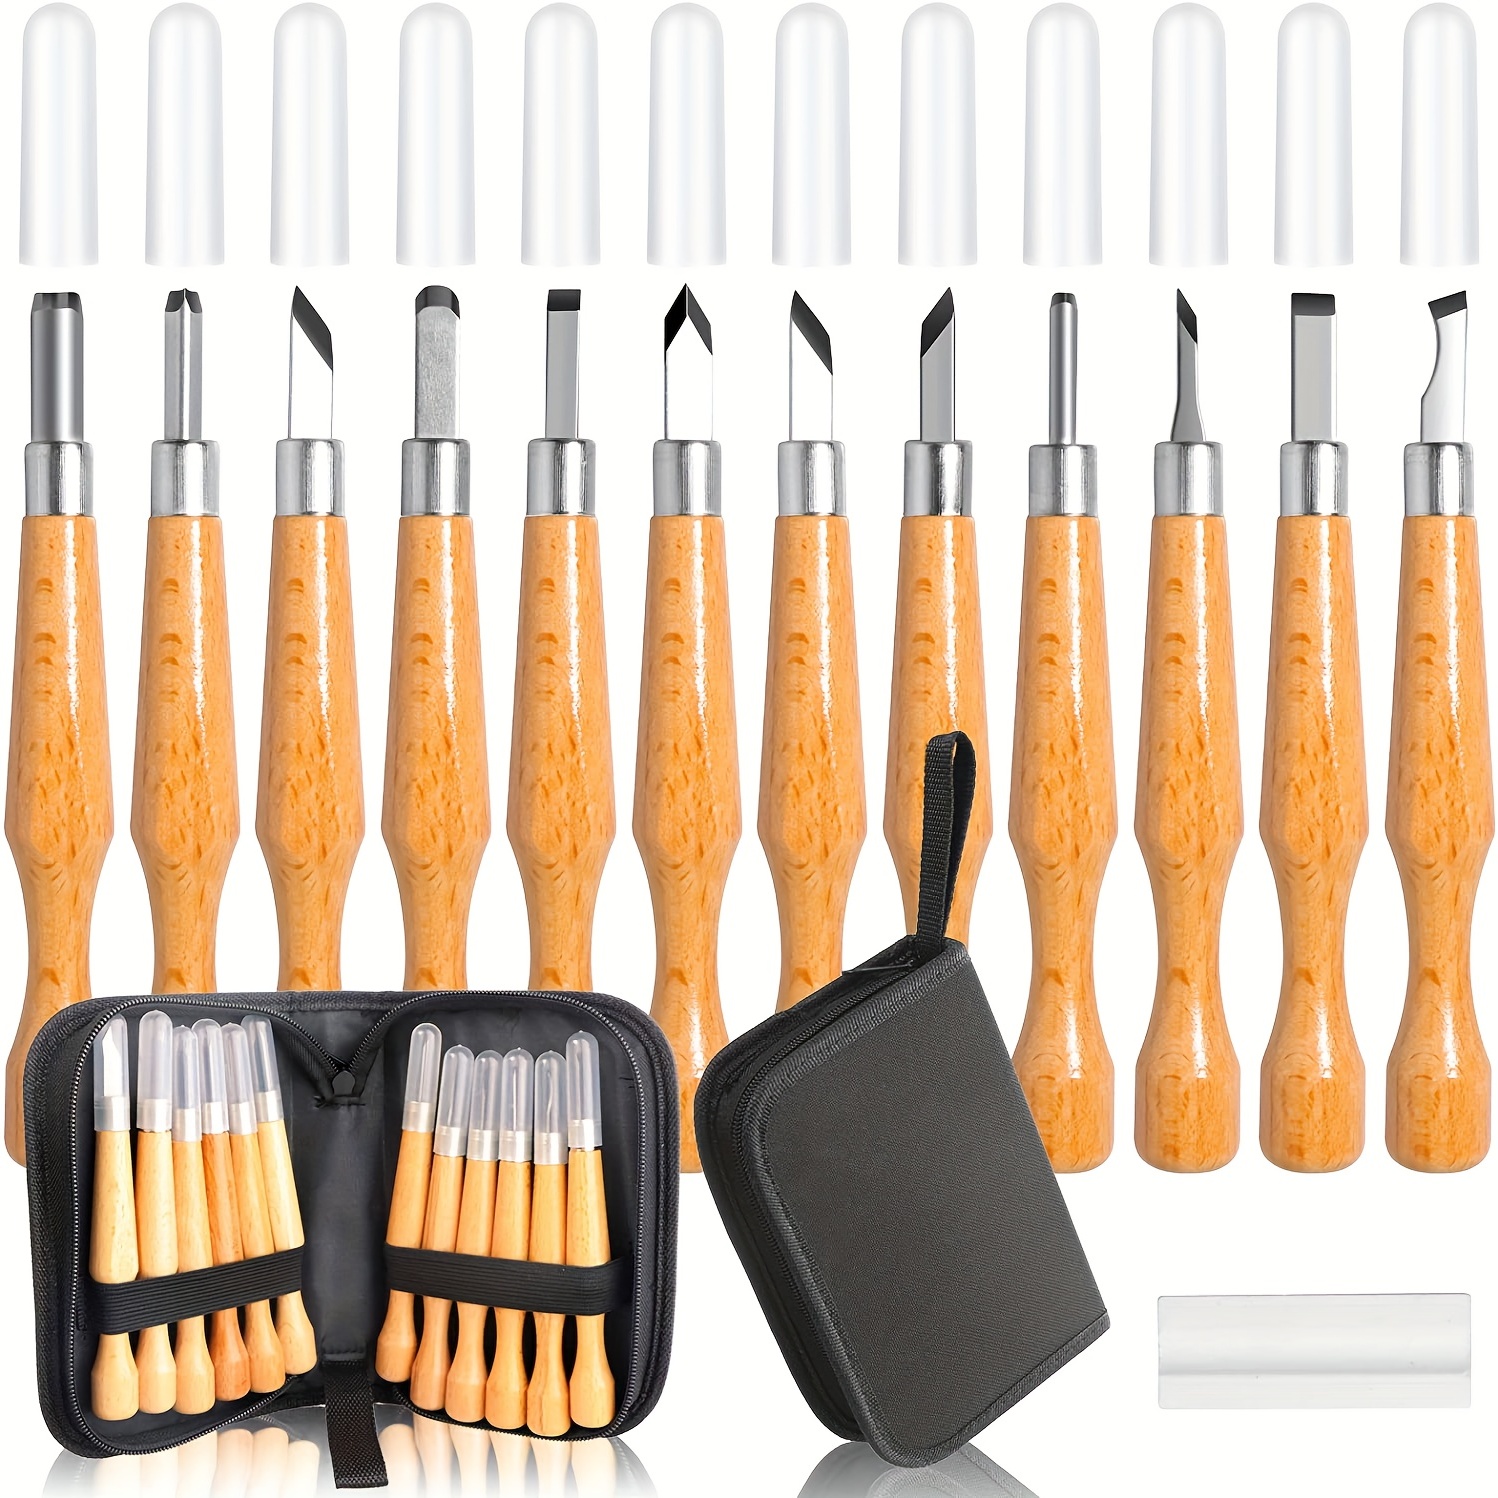 JJ Care Wood Carving Kit with 8 Piece Wood Carving Tools & 10 Wood Blocks for Kids and Adults, Premium Wood Carving Set SK7 Carbon Steel Tools, Basswo